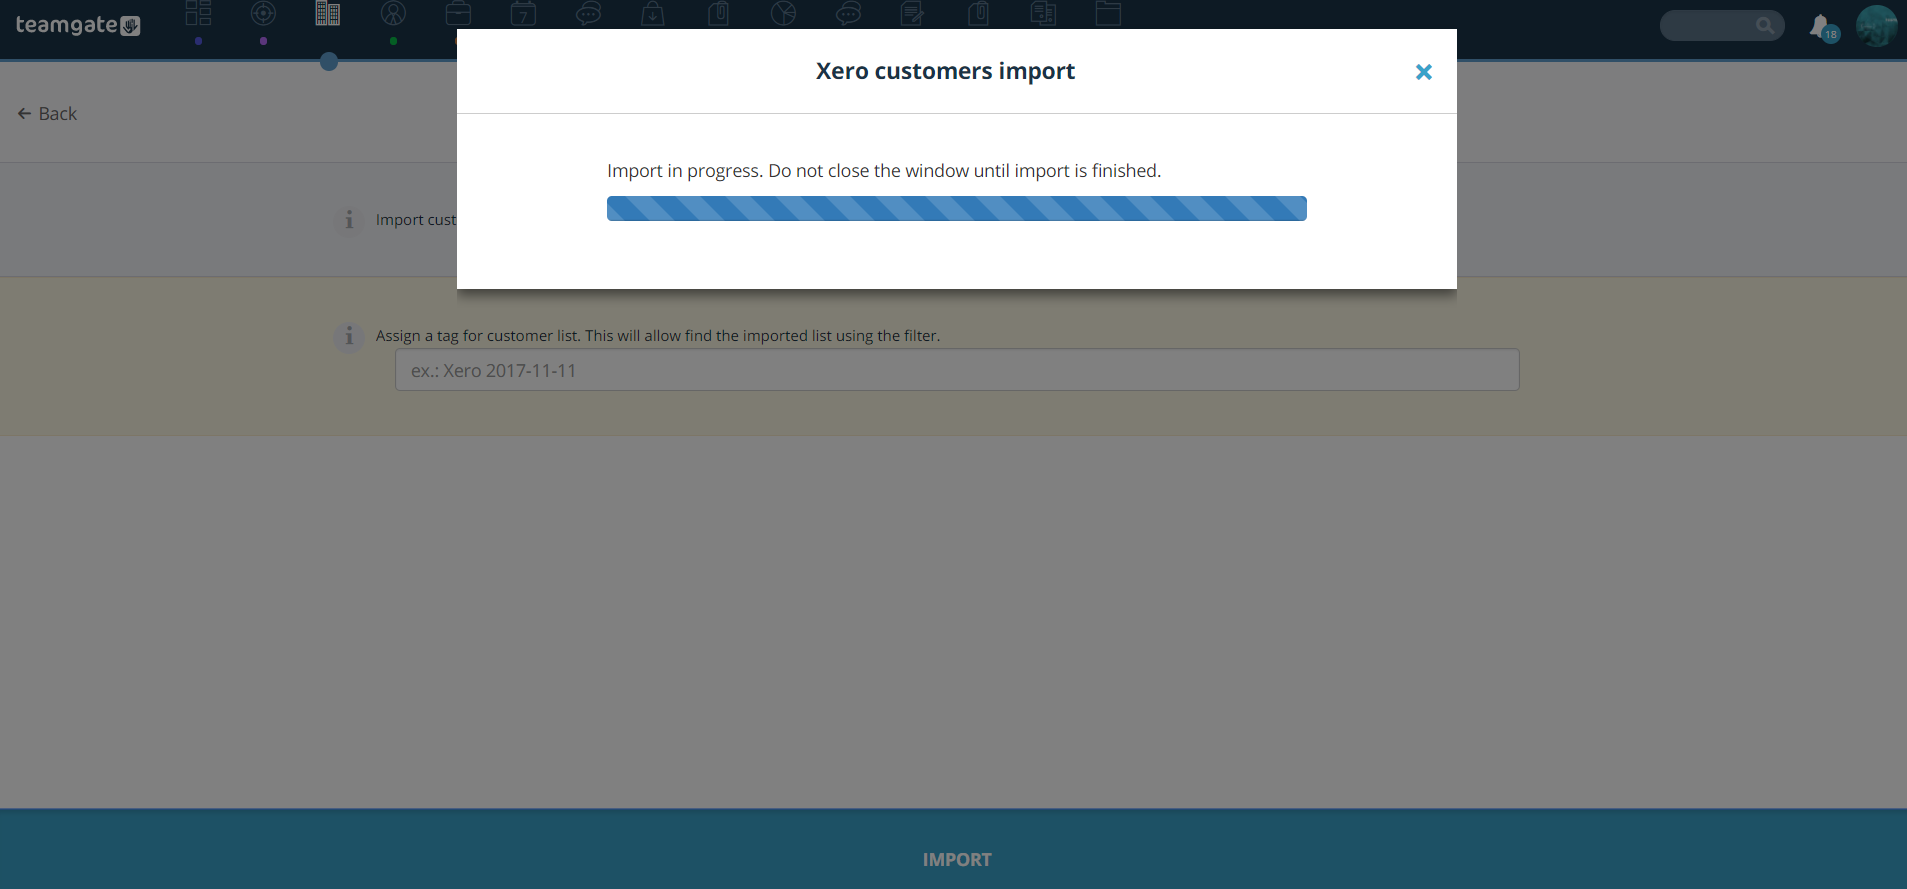 xero-customers-import-in-progress-teamgate-integration.png